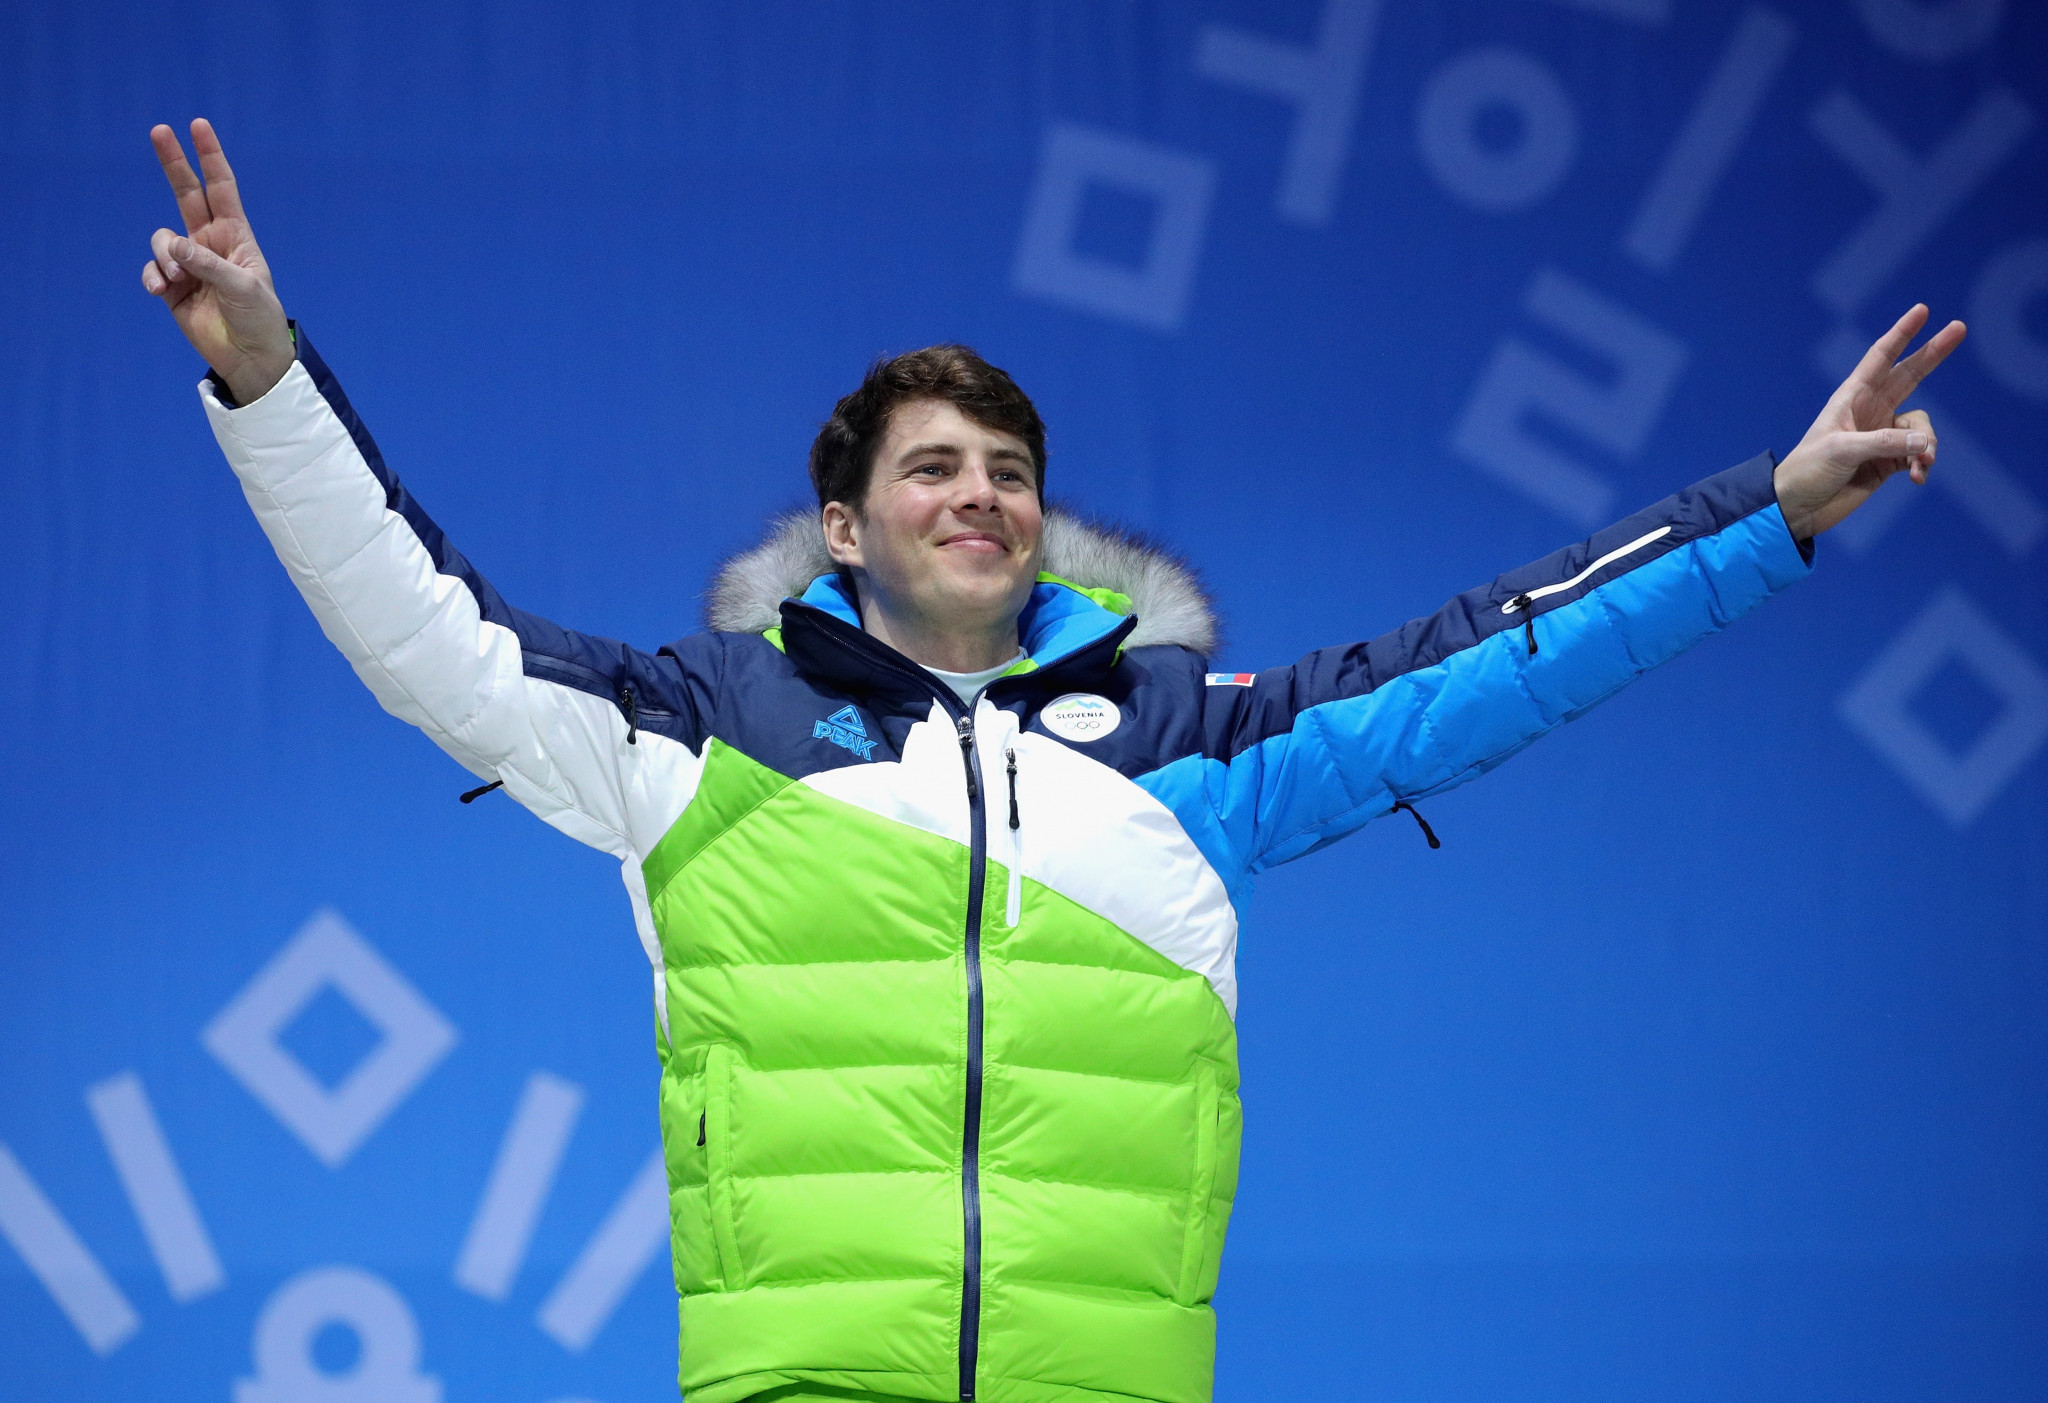 Three-time Olympic medallist Žan Košir is due to be one of Slovenia's flagbearers for the Opening Ceremony but has tested positive for COVID-19 ©Getty Images